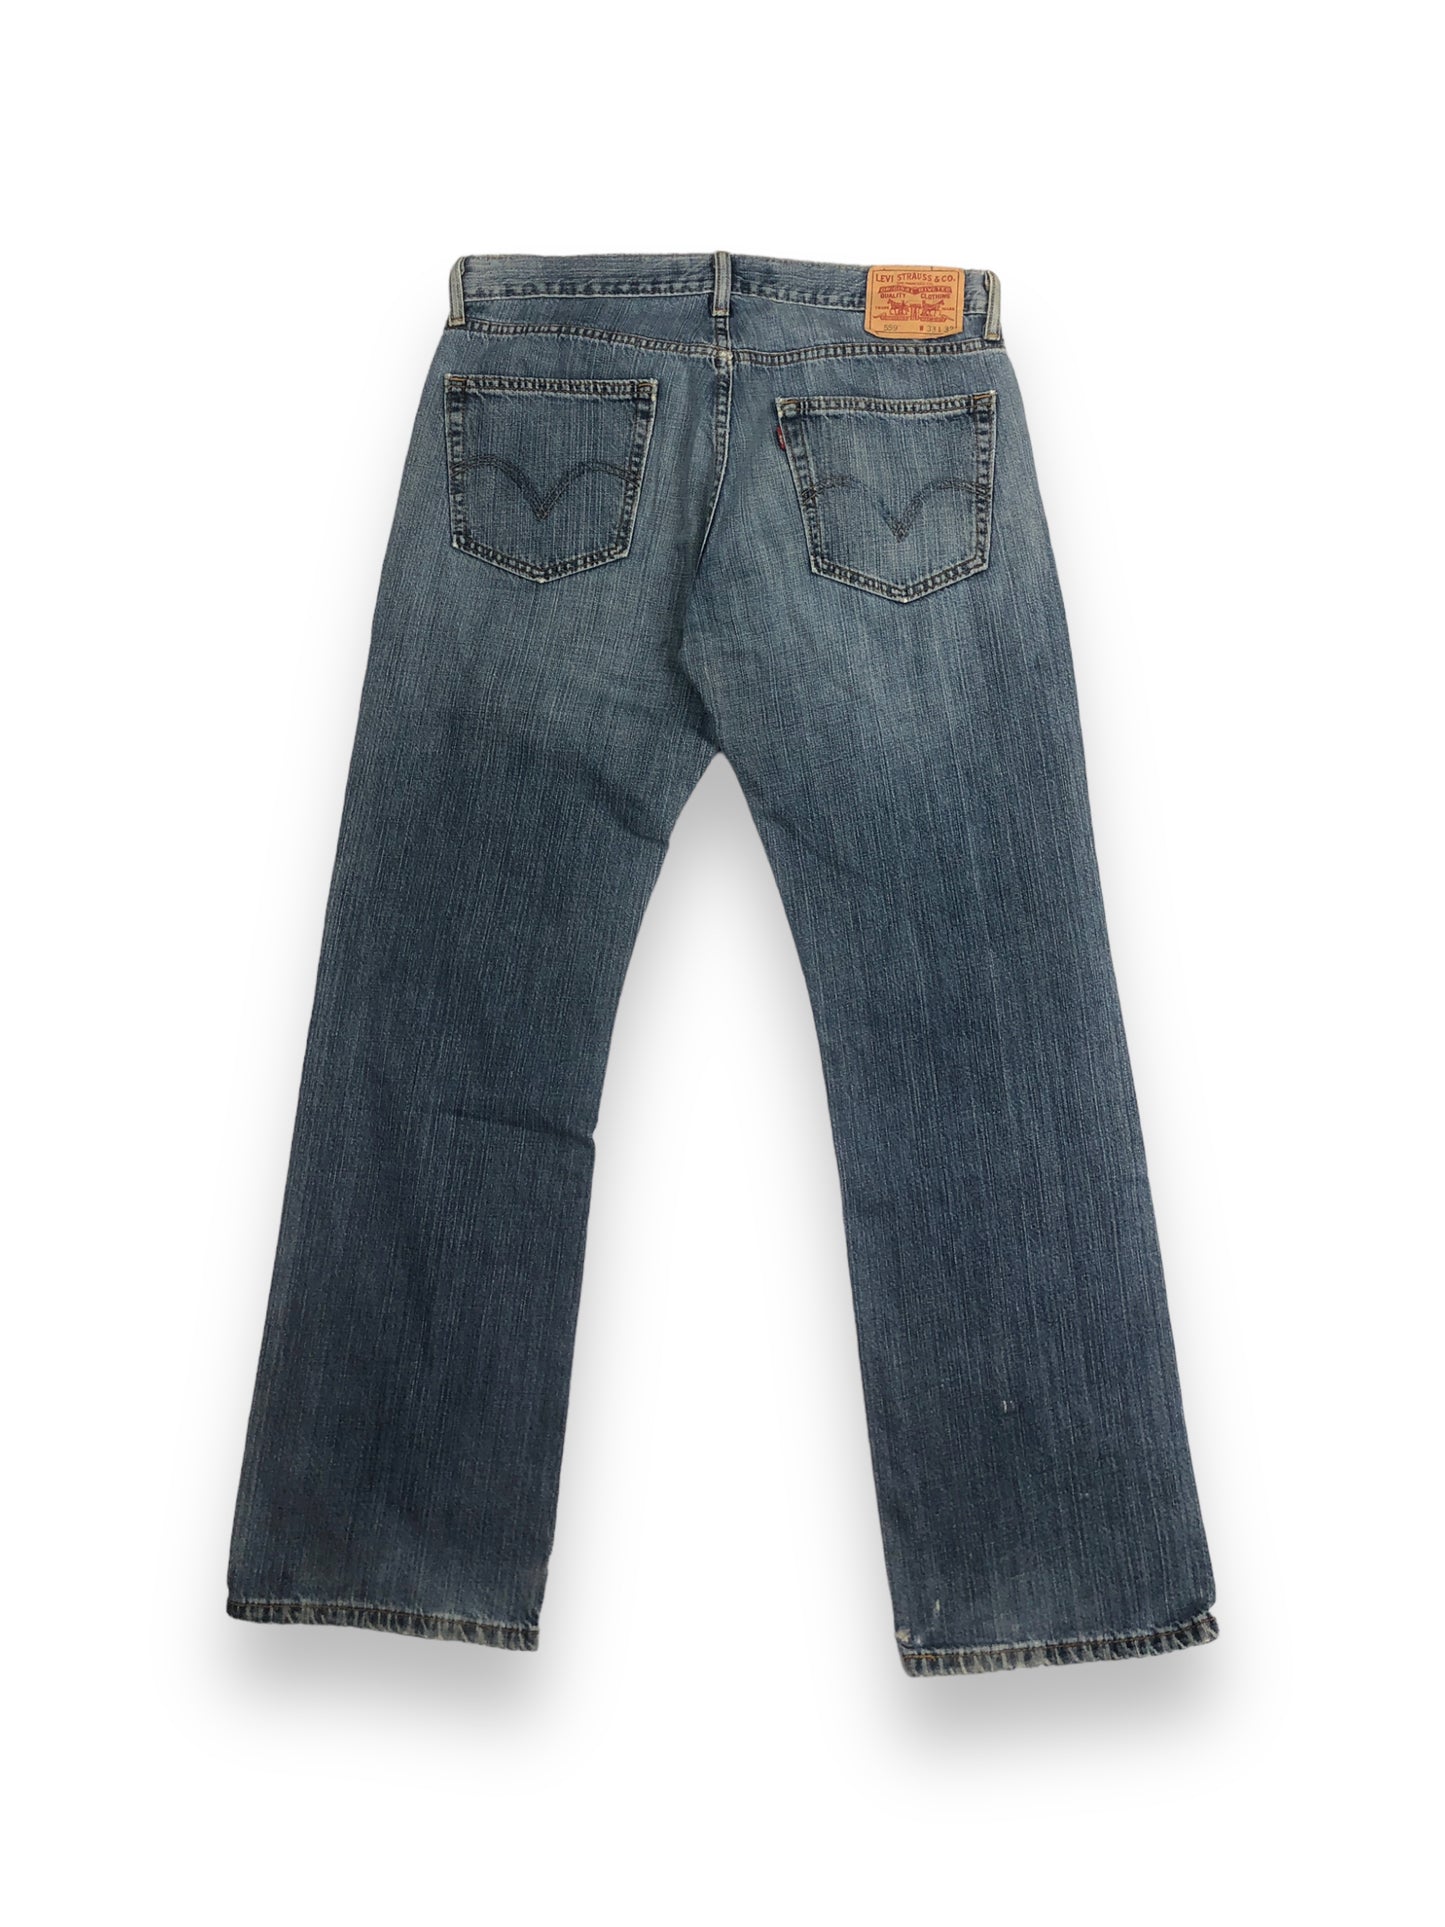 Levis 559 Relaxed Jeans